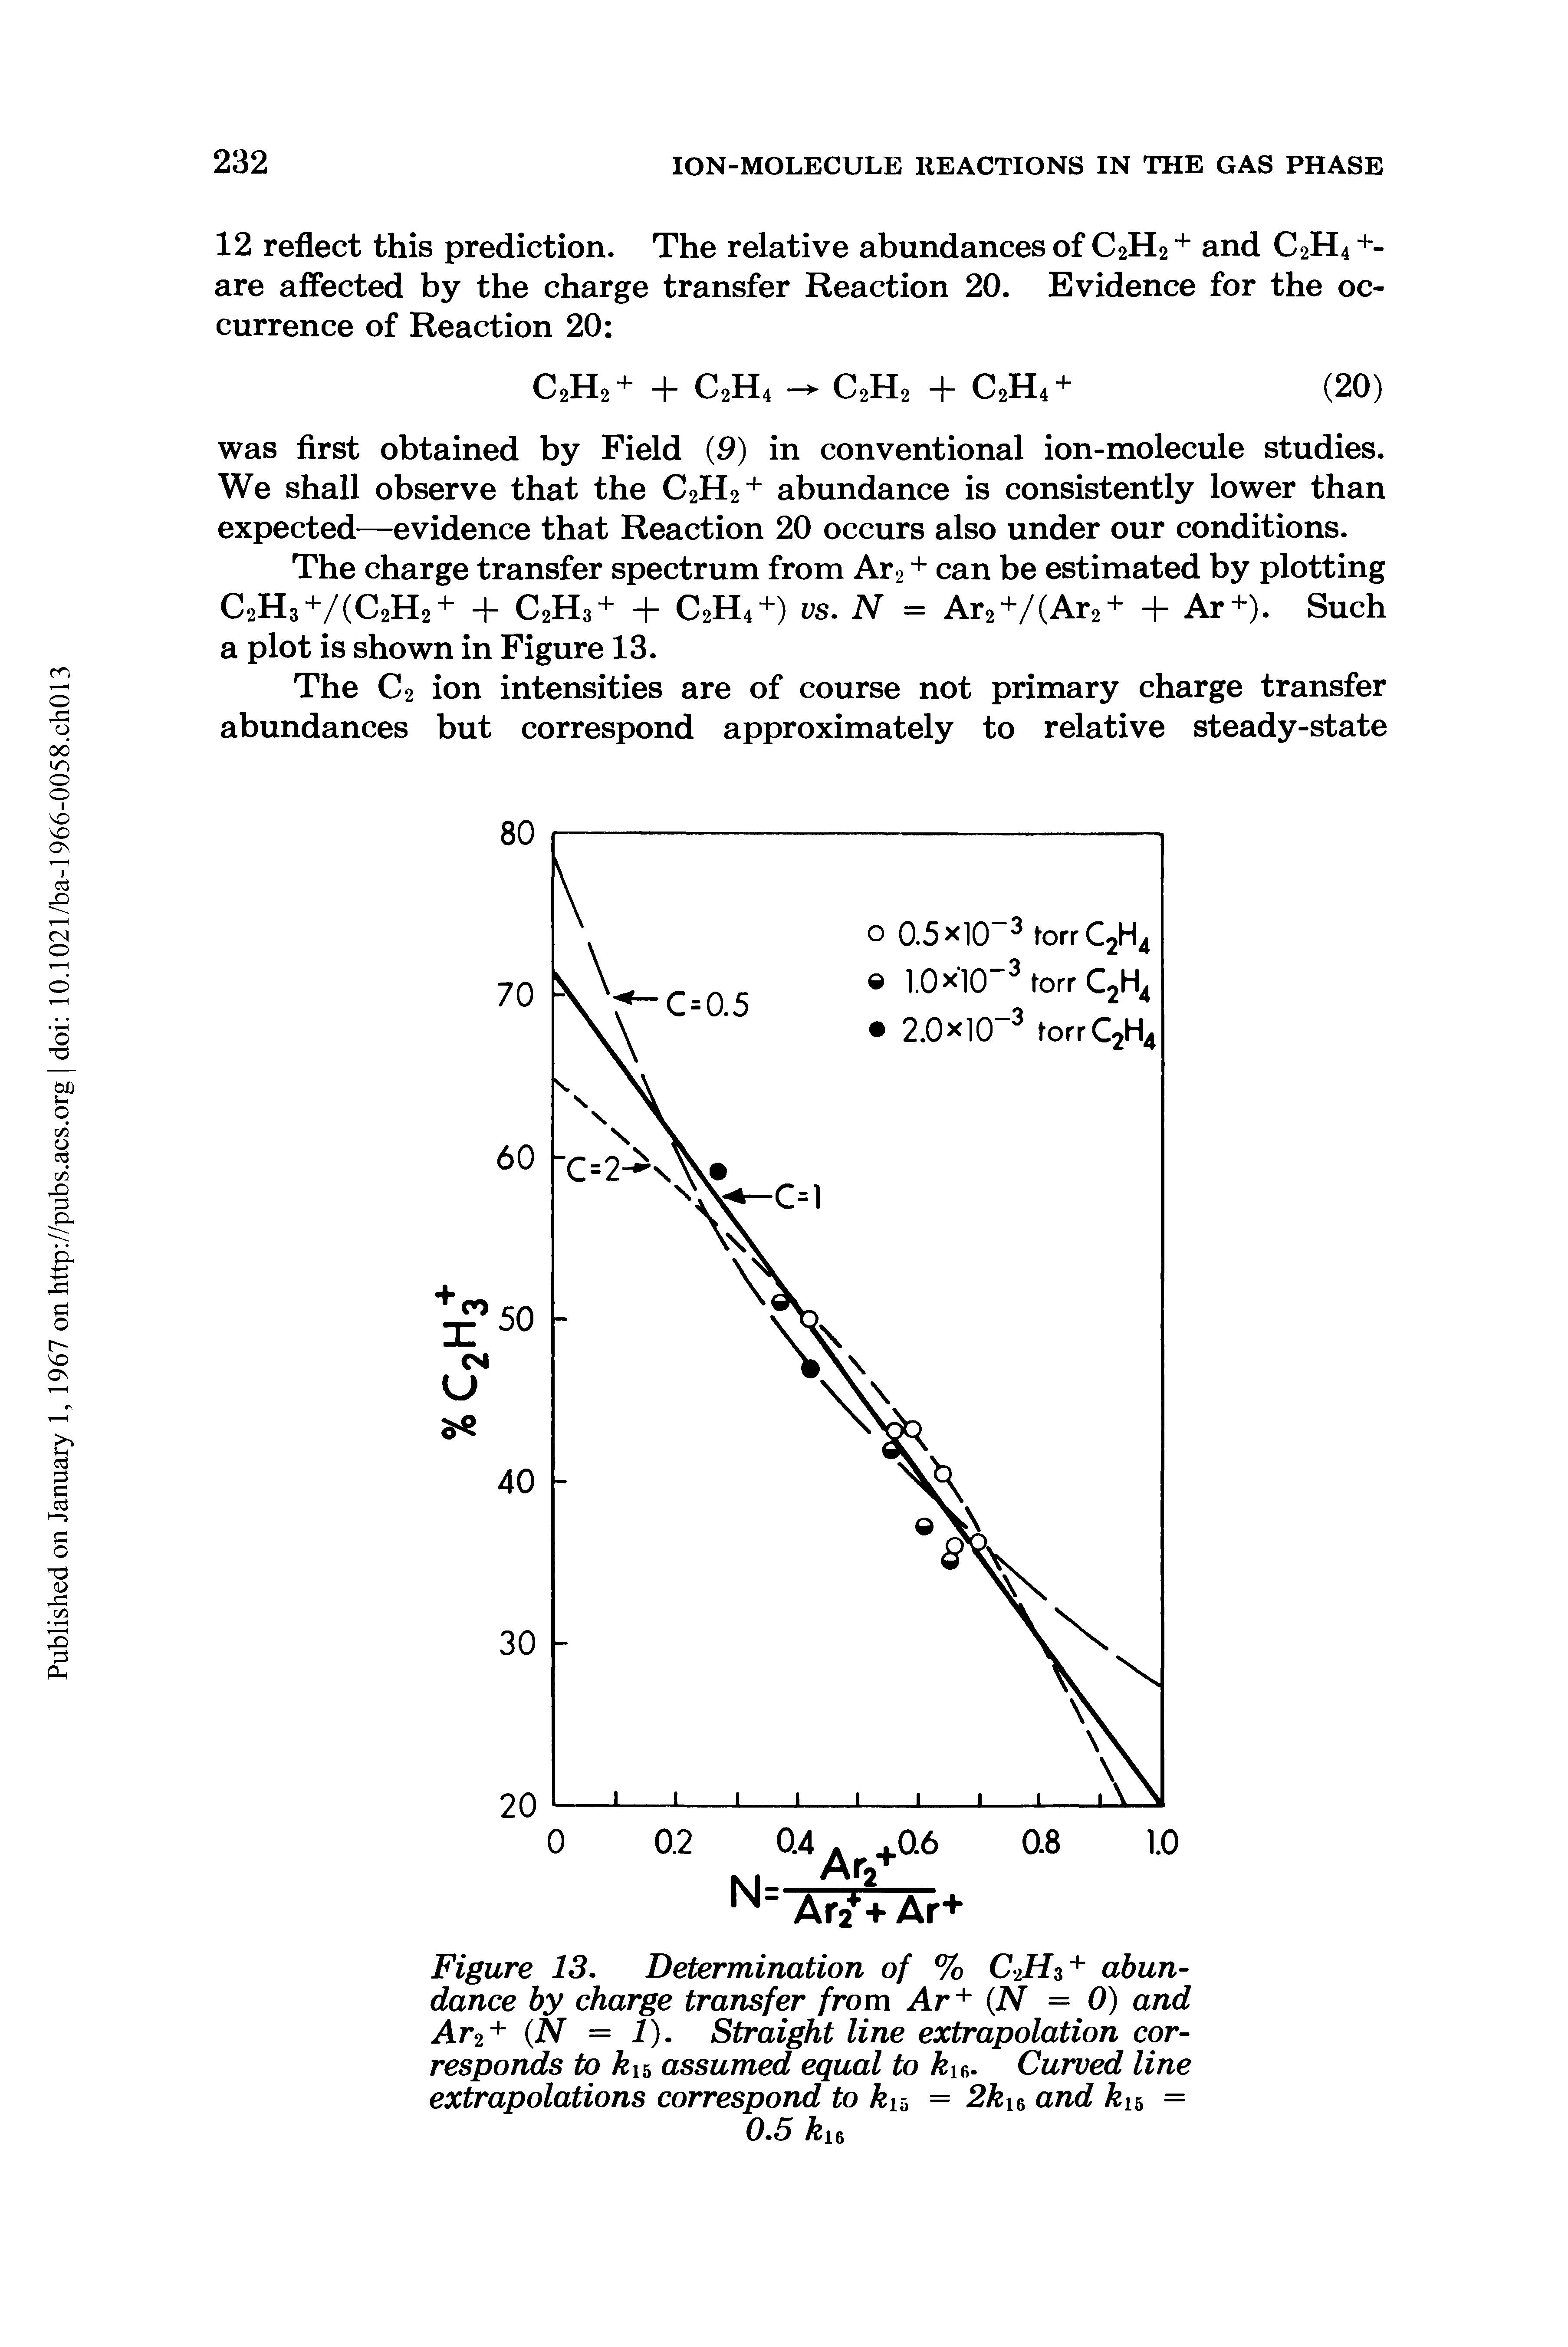 Figure 13. Determination of % C2i/3+ abundance by charge transfer from Ar+ (N = 0) and Ar2+ (N = 1). Straight line extrapolation corresponds to i5 assumed equal to k. Curved line extrapolations correspond to kYh = 2ki6 and klb = 0.5 ie...